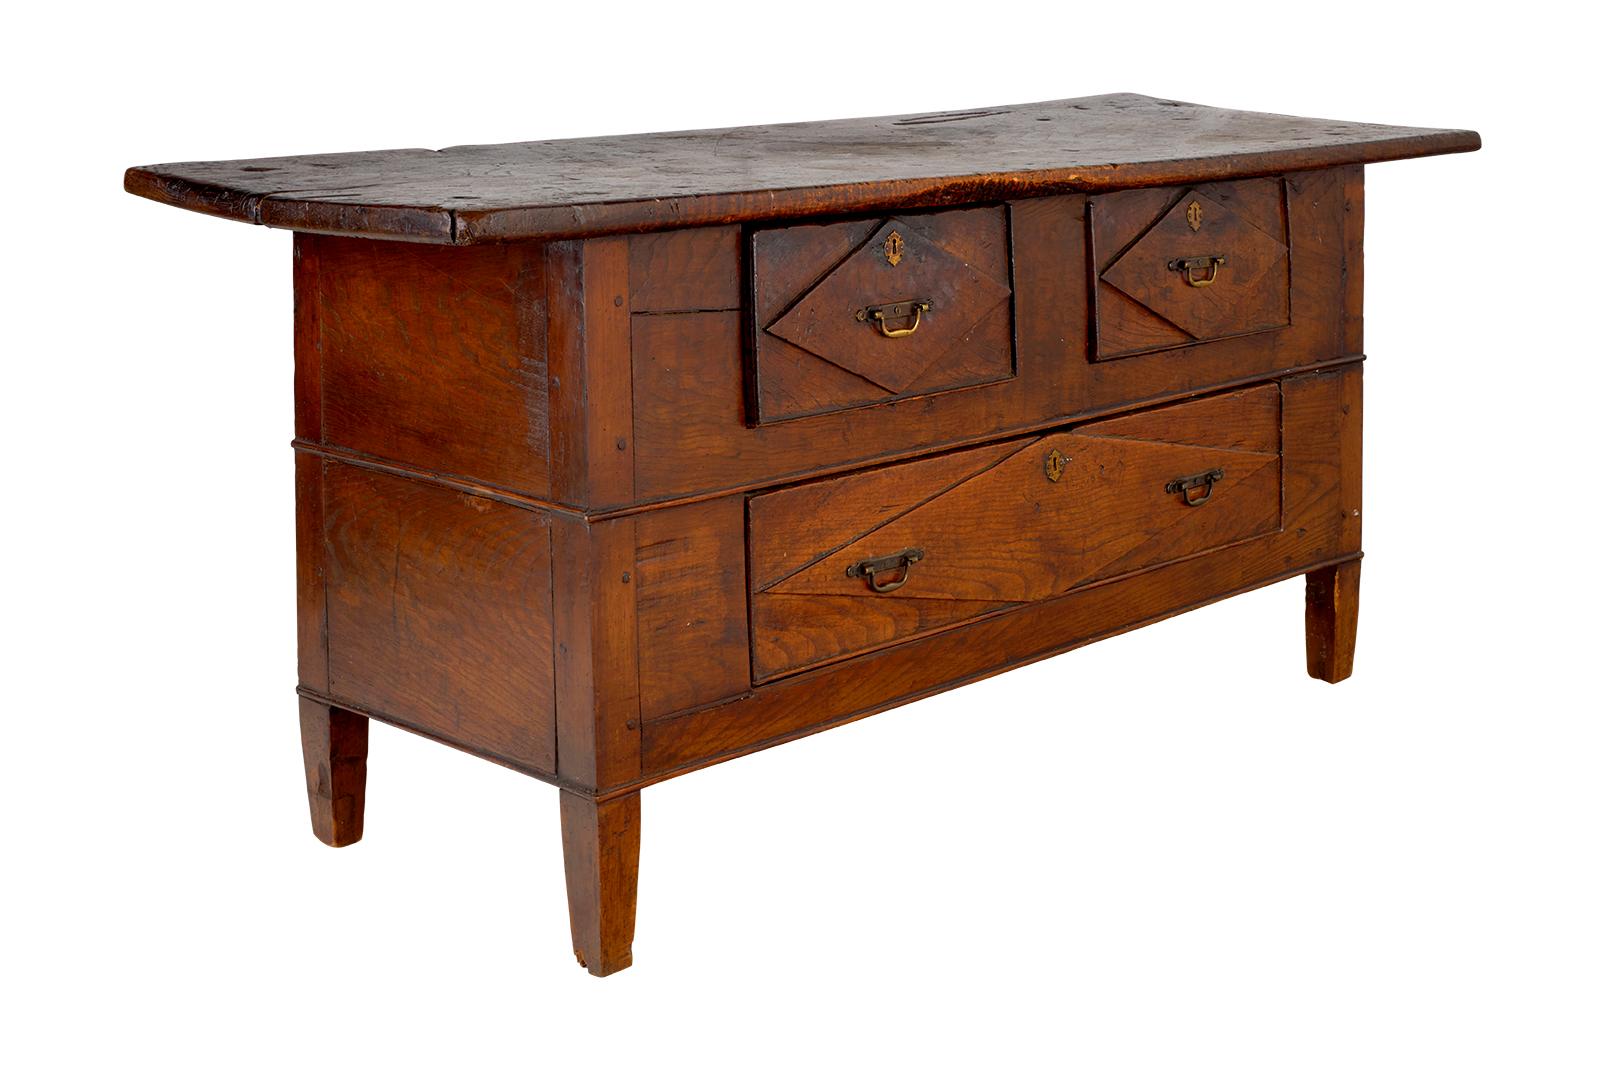 Spanish Colonial Spanish Serving Table In Patinaed Walnut For Sale